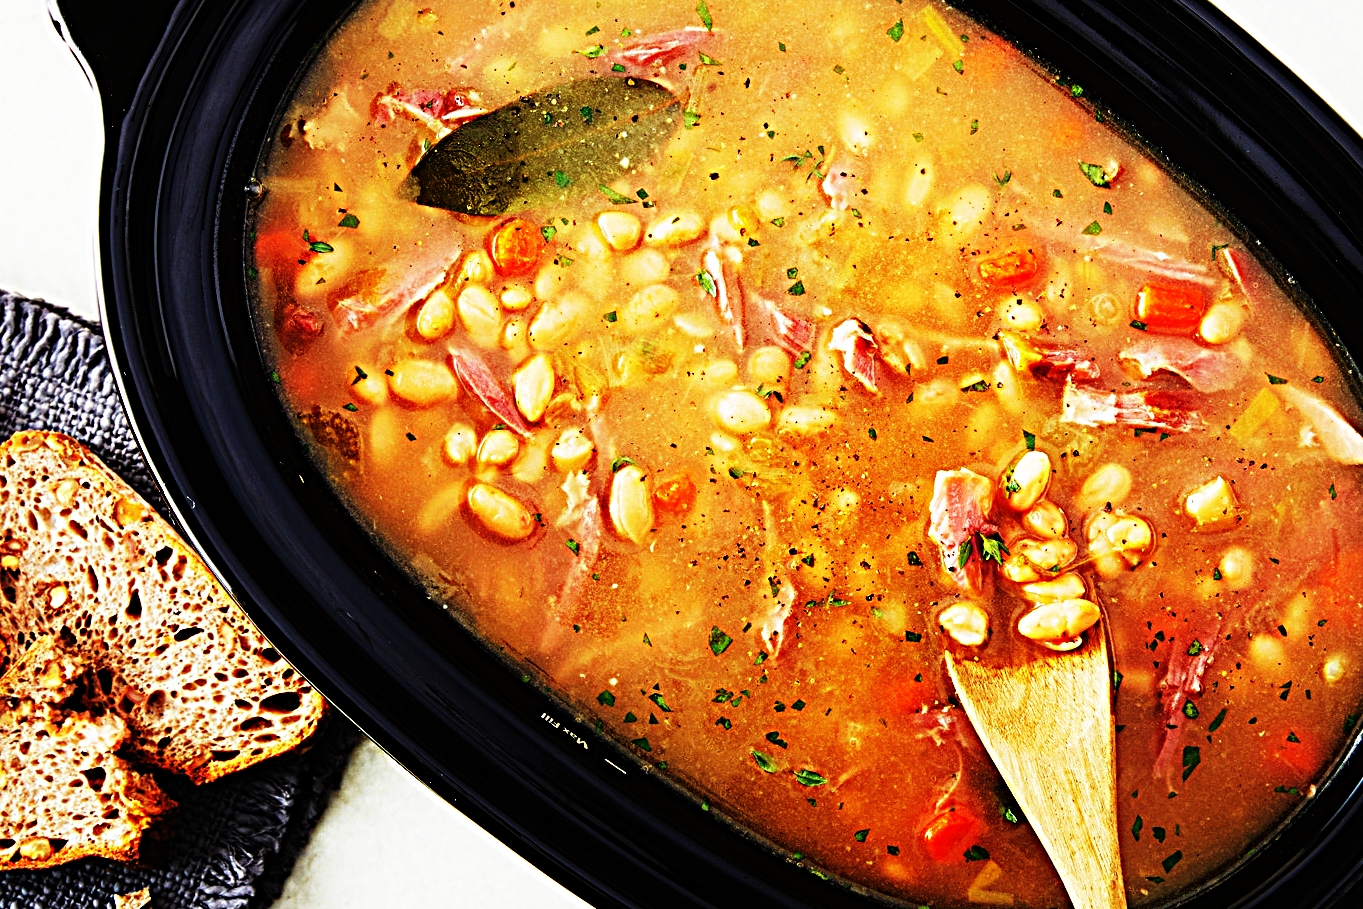 Stupid-Easy Recipe for Slow Cooker Smoky Ham and White Bean Soup (#1 Top-Rated)